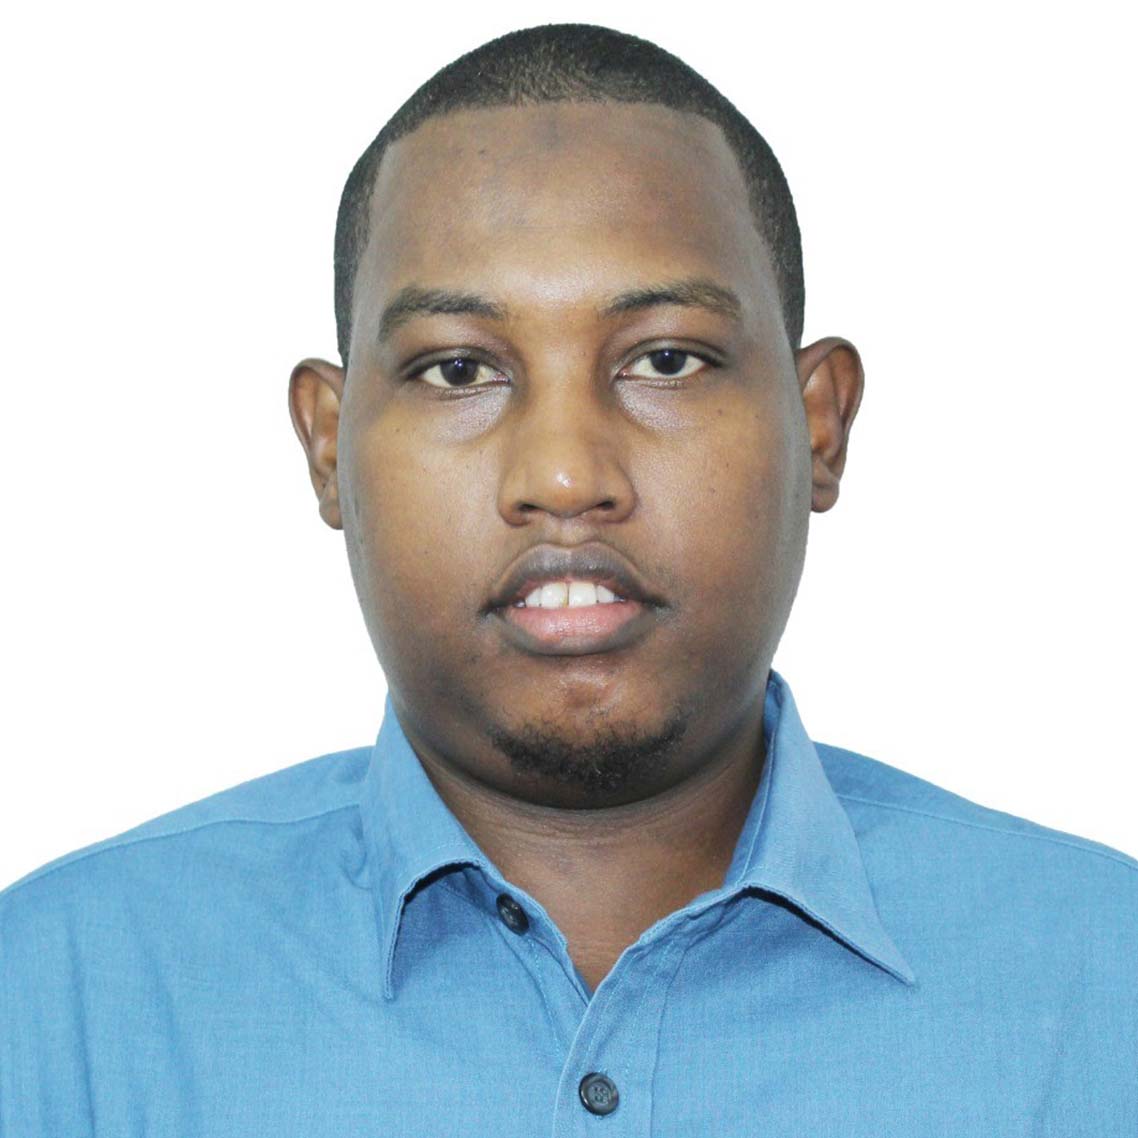 Mohamed Hassan Musse